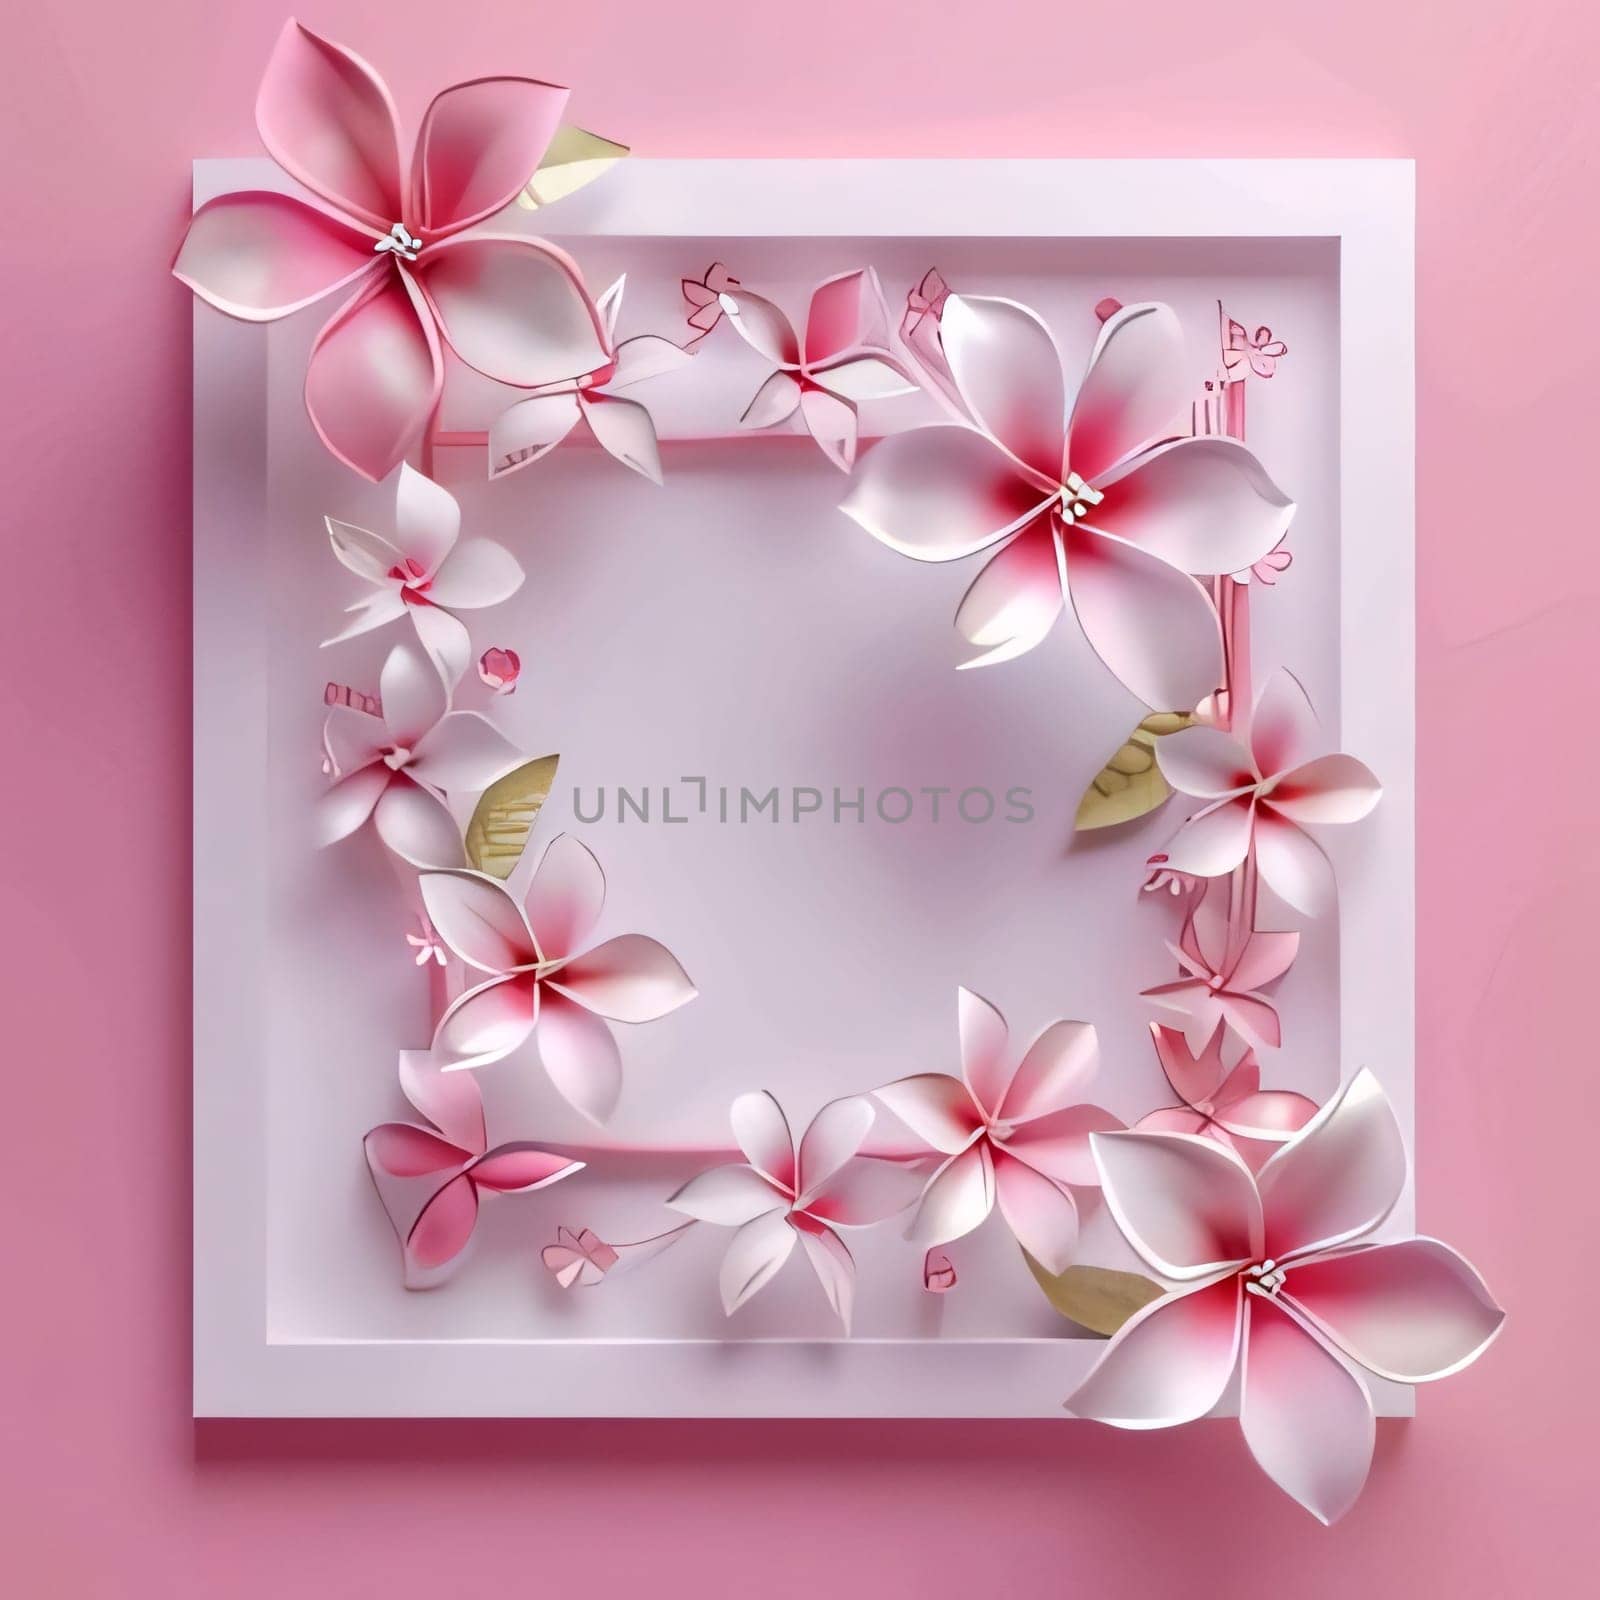 Pink frame card with space for your own content around the decoration of pink flowers. Flowering flowers, a symbol of spring, new life. A joyful time of nature awakening to life.